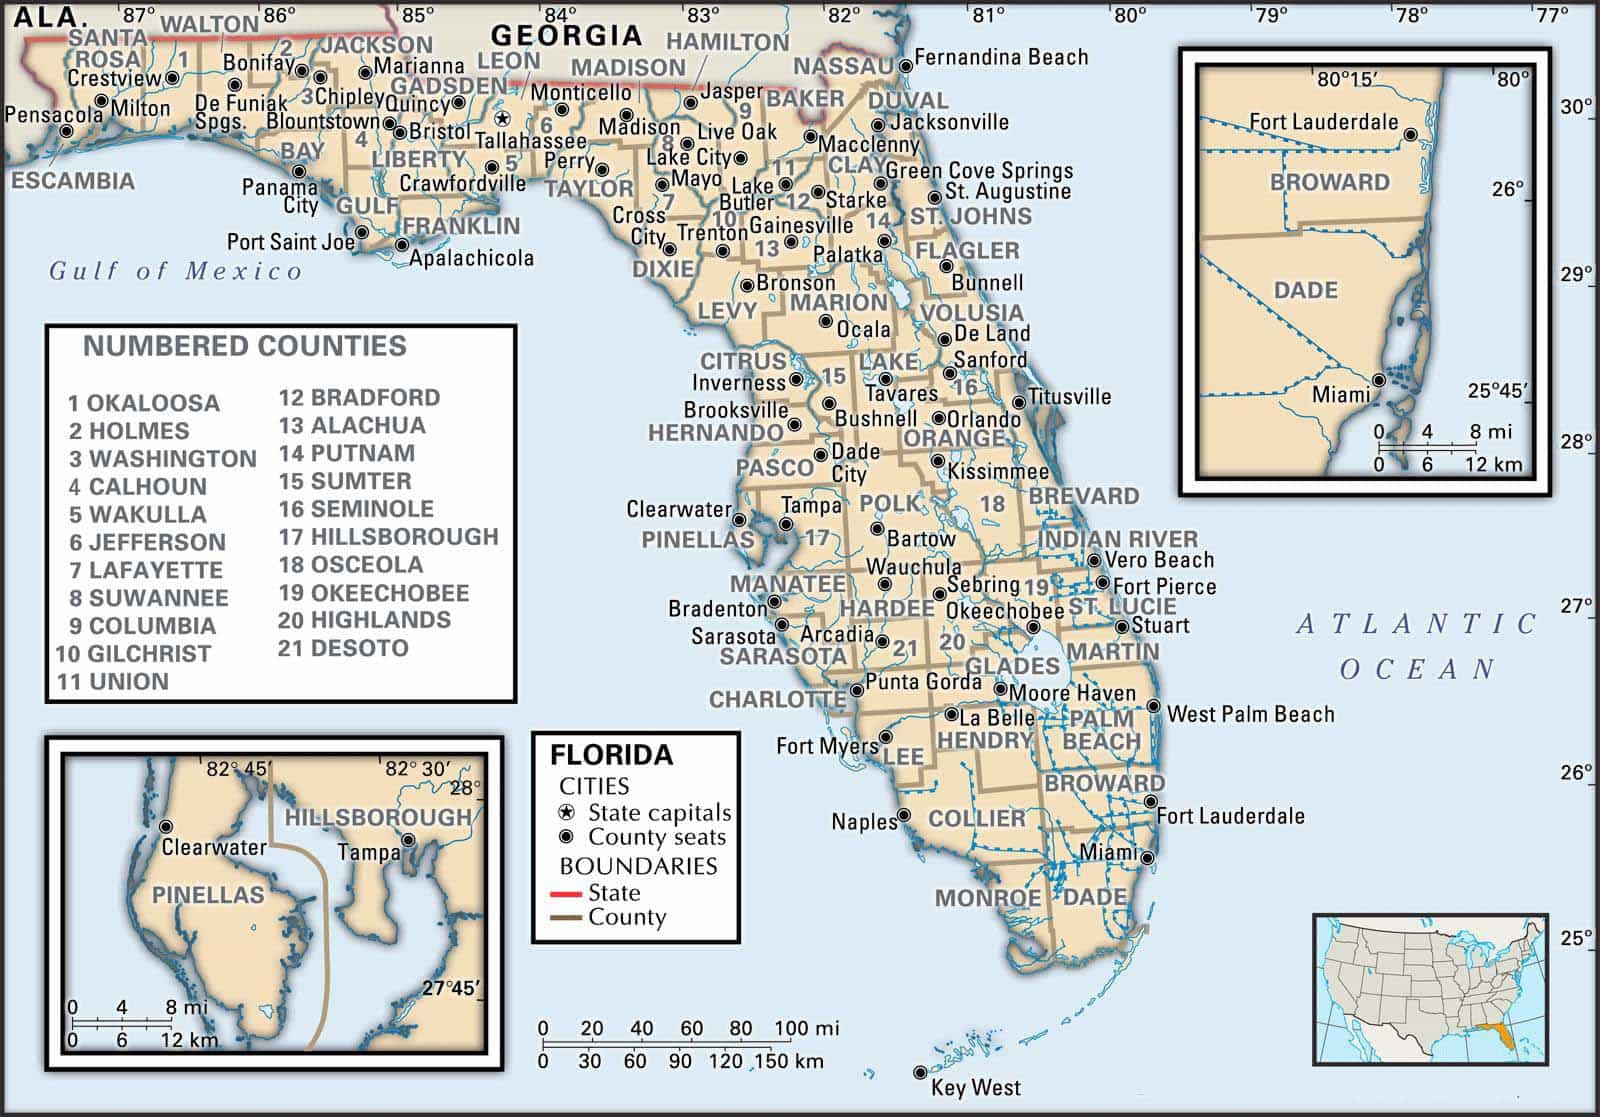 Historical Facts Of Florida Counties Guide